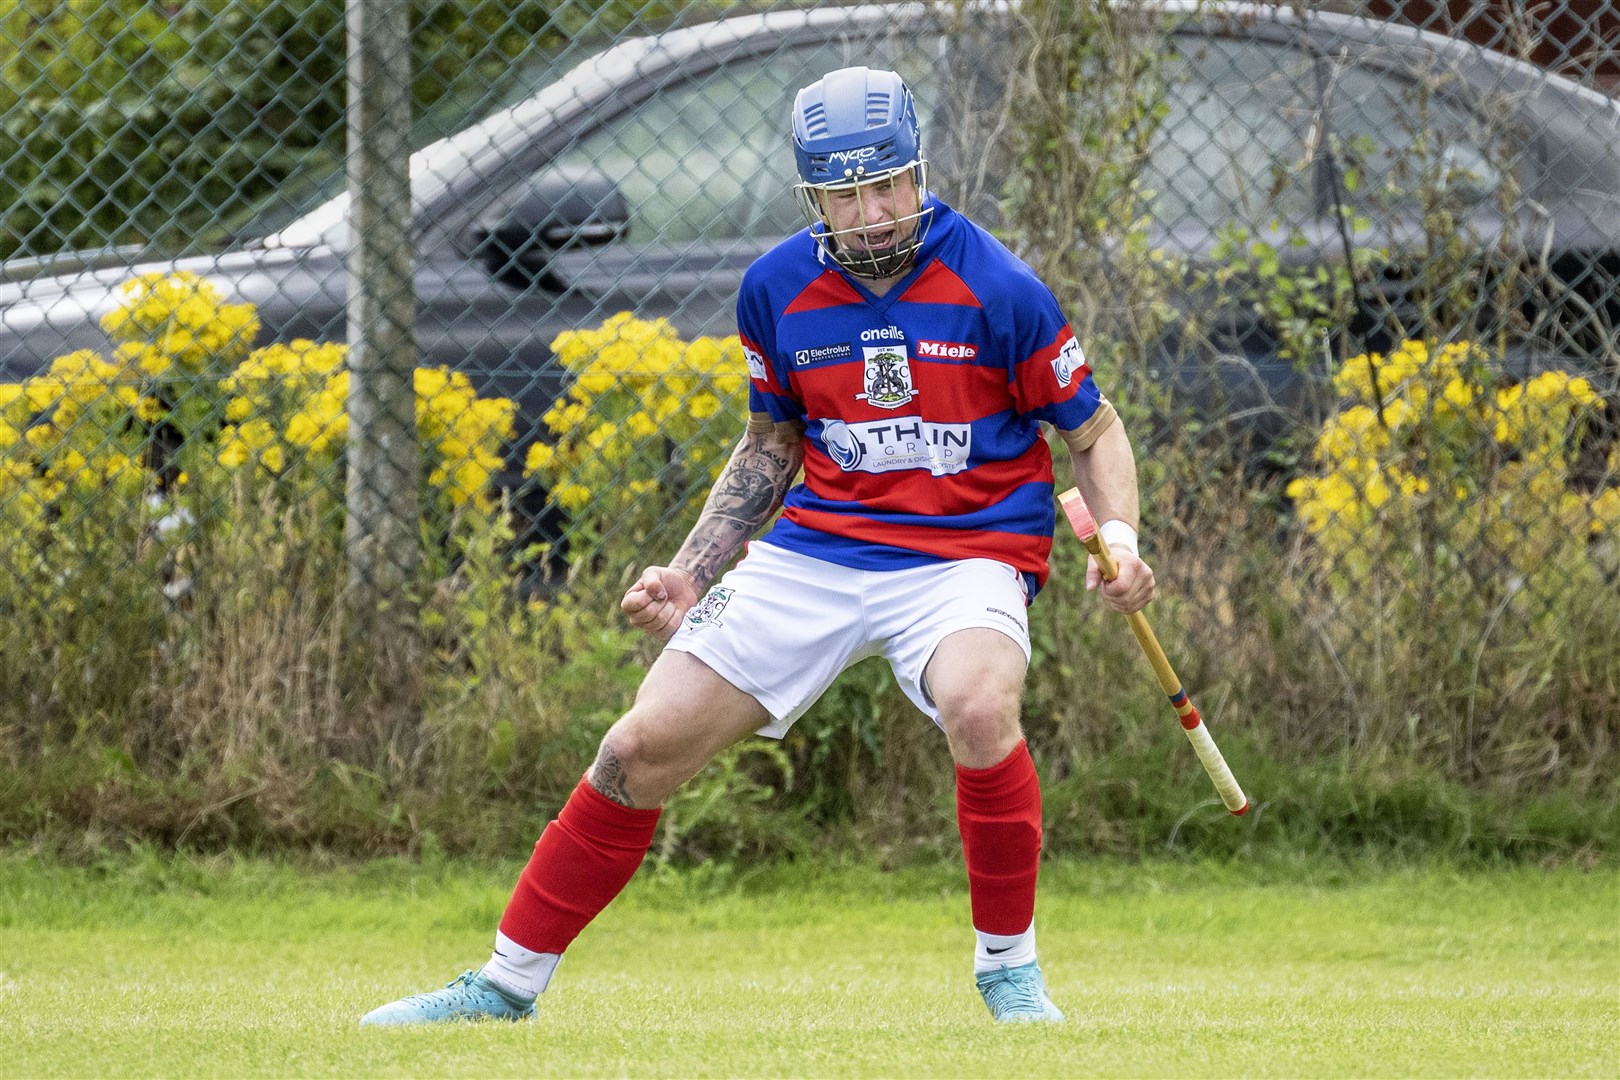 Kingussie's James Falconer is a doubt for the final having suffered a nasty gash at the weekend in a pitch-side collision.